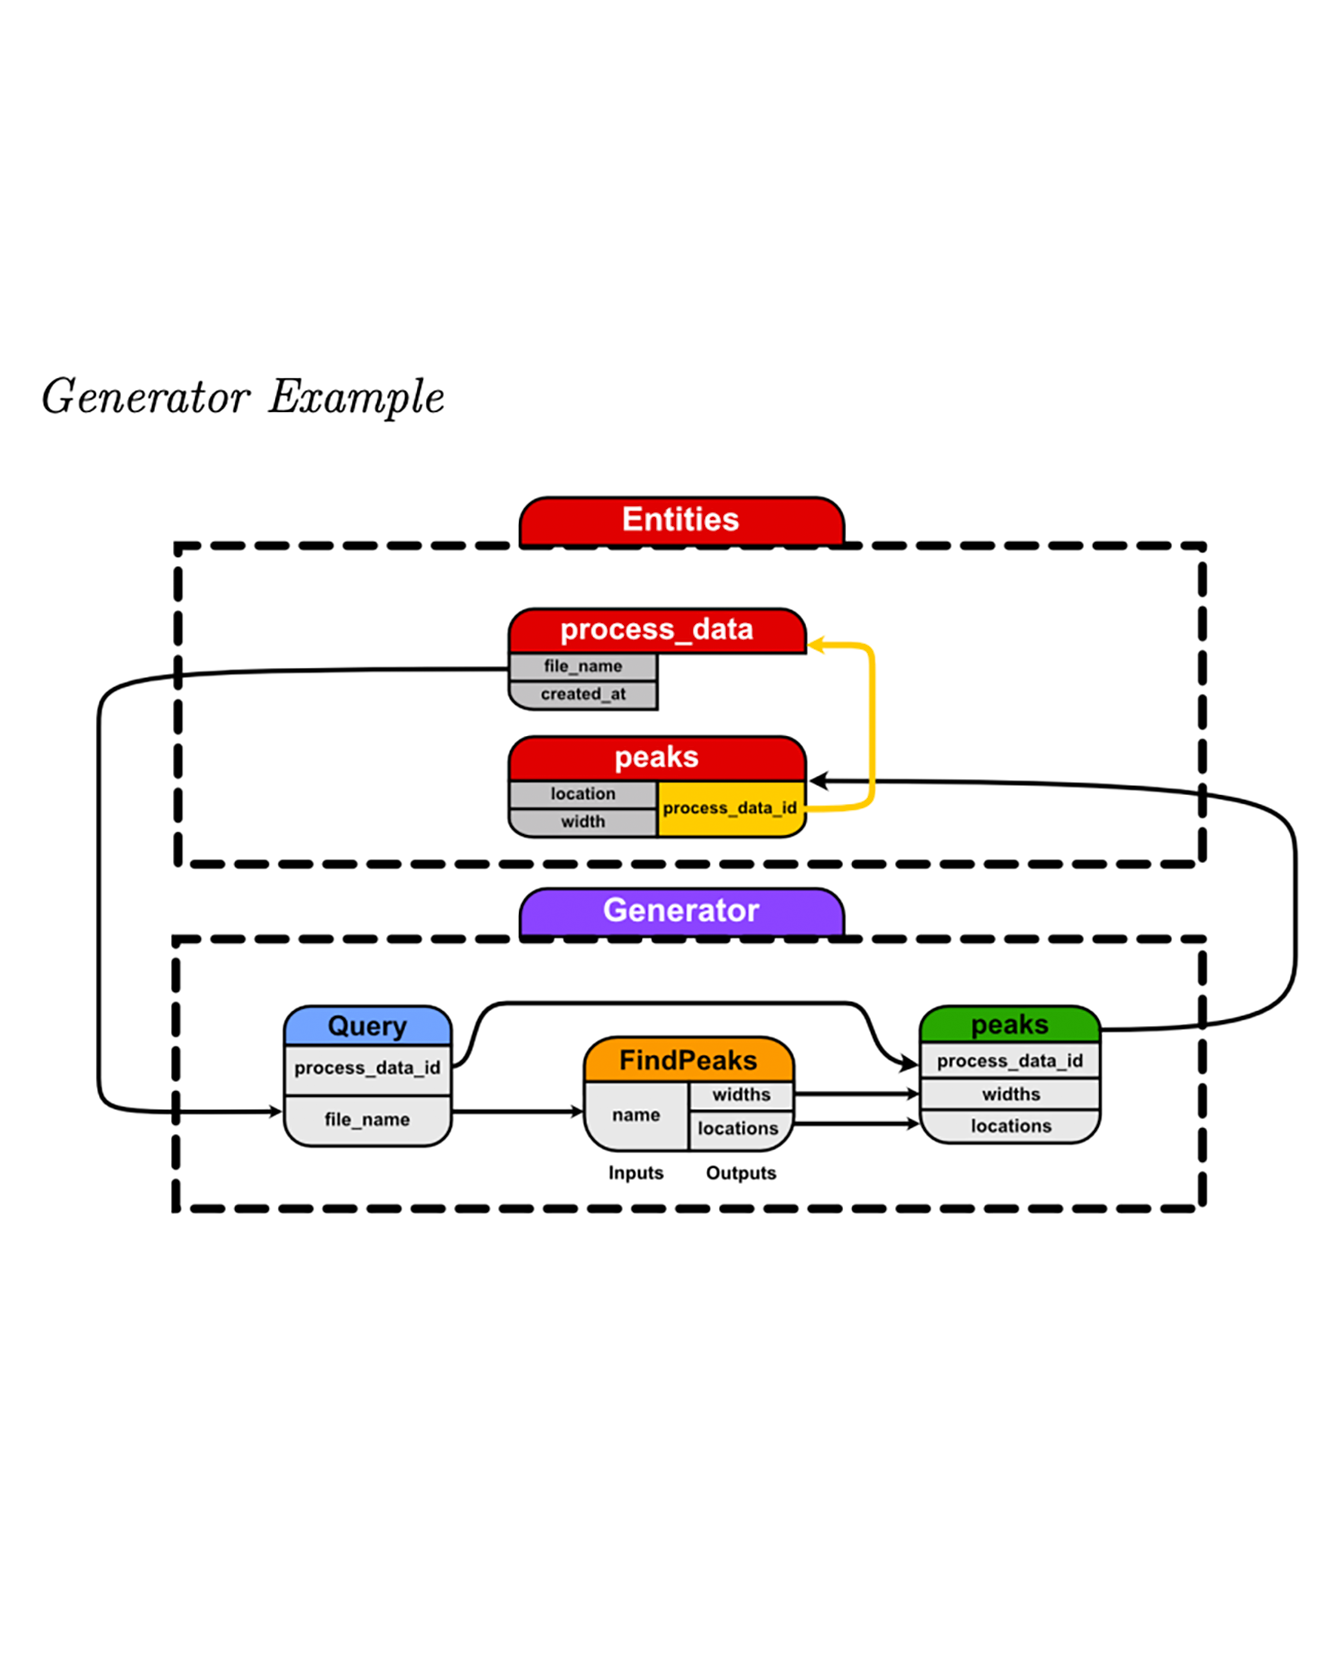 An example of the flow of information within a Generator